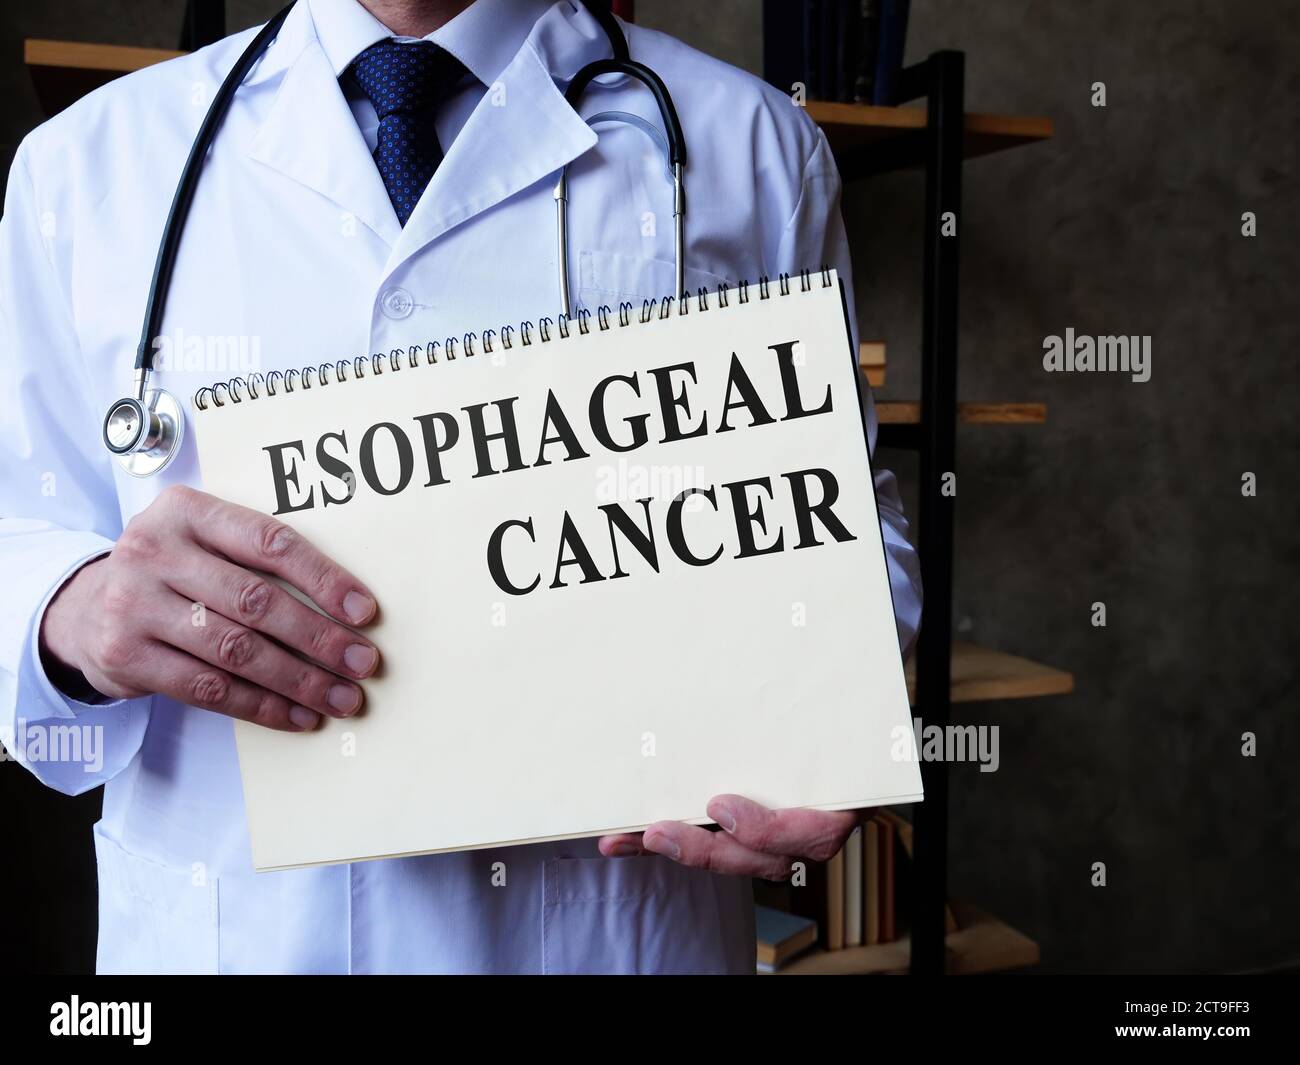 Esophageal cancer concept. Doctor holds medical papers. Stock Photo